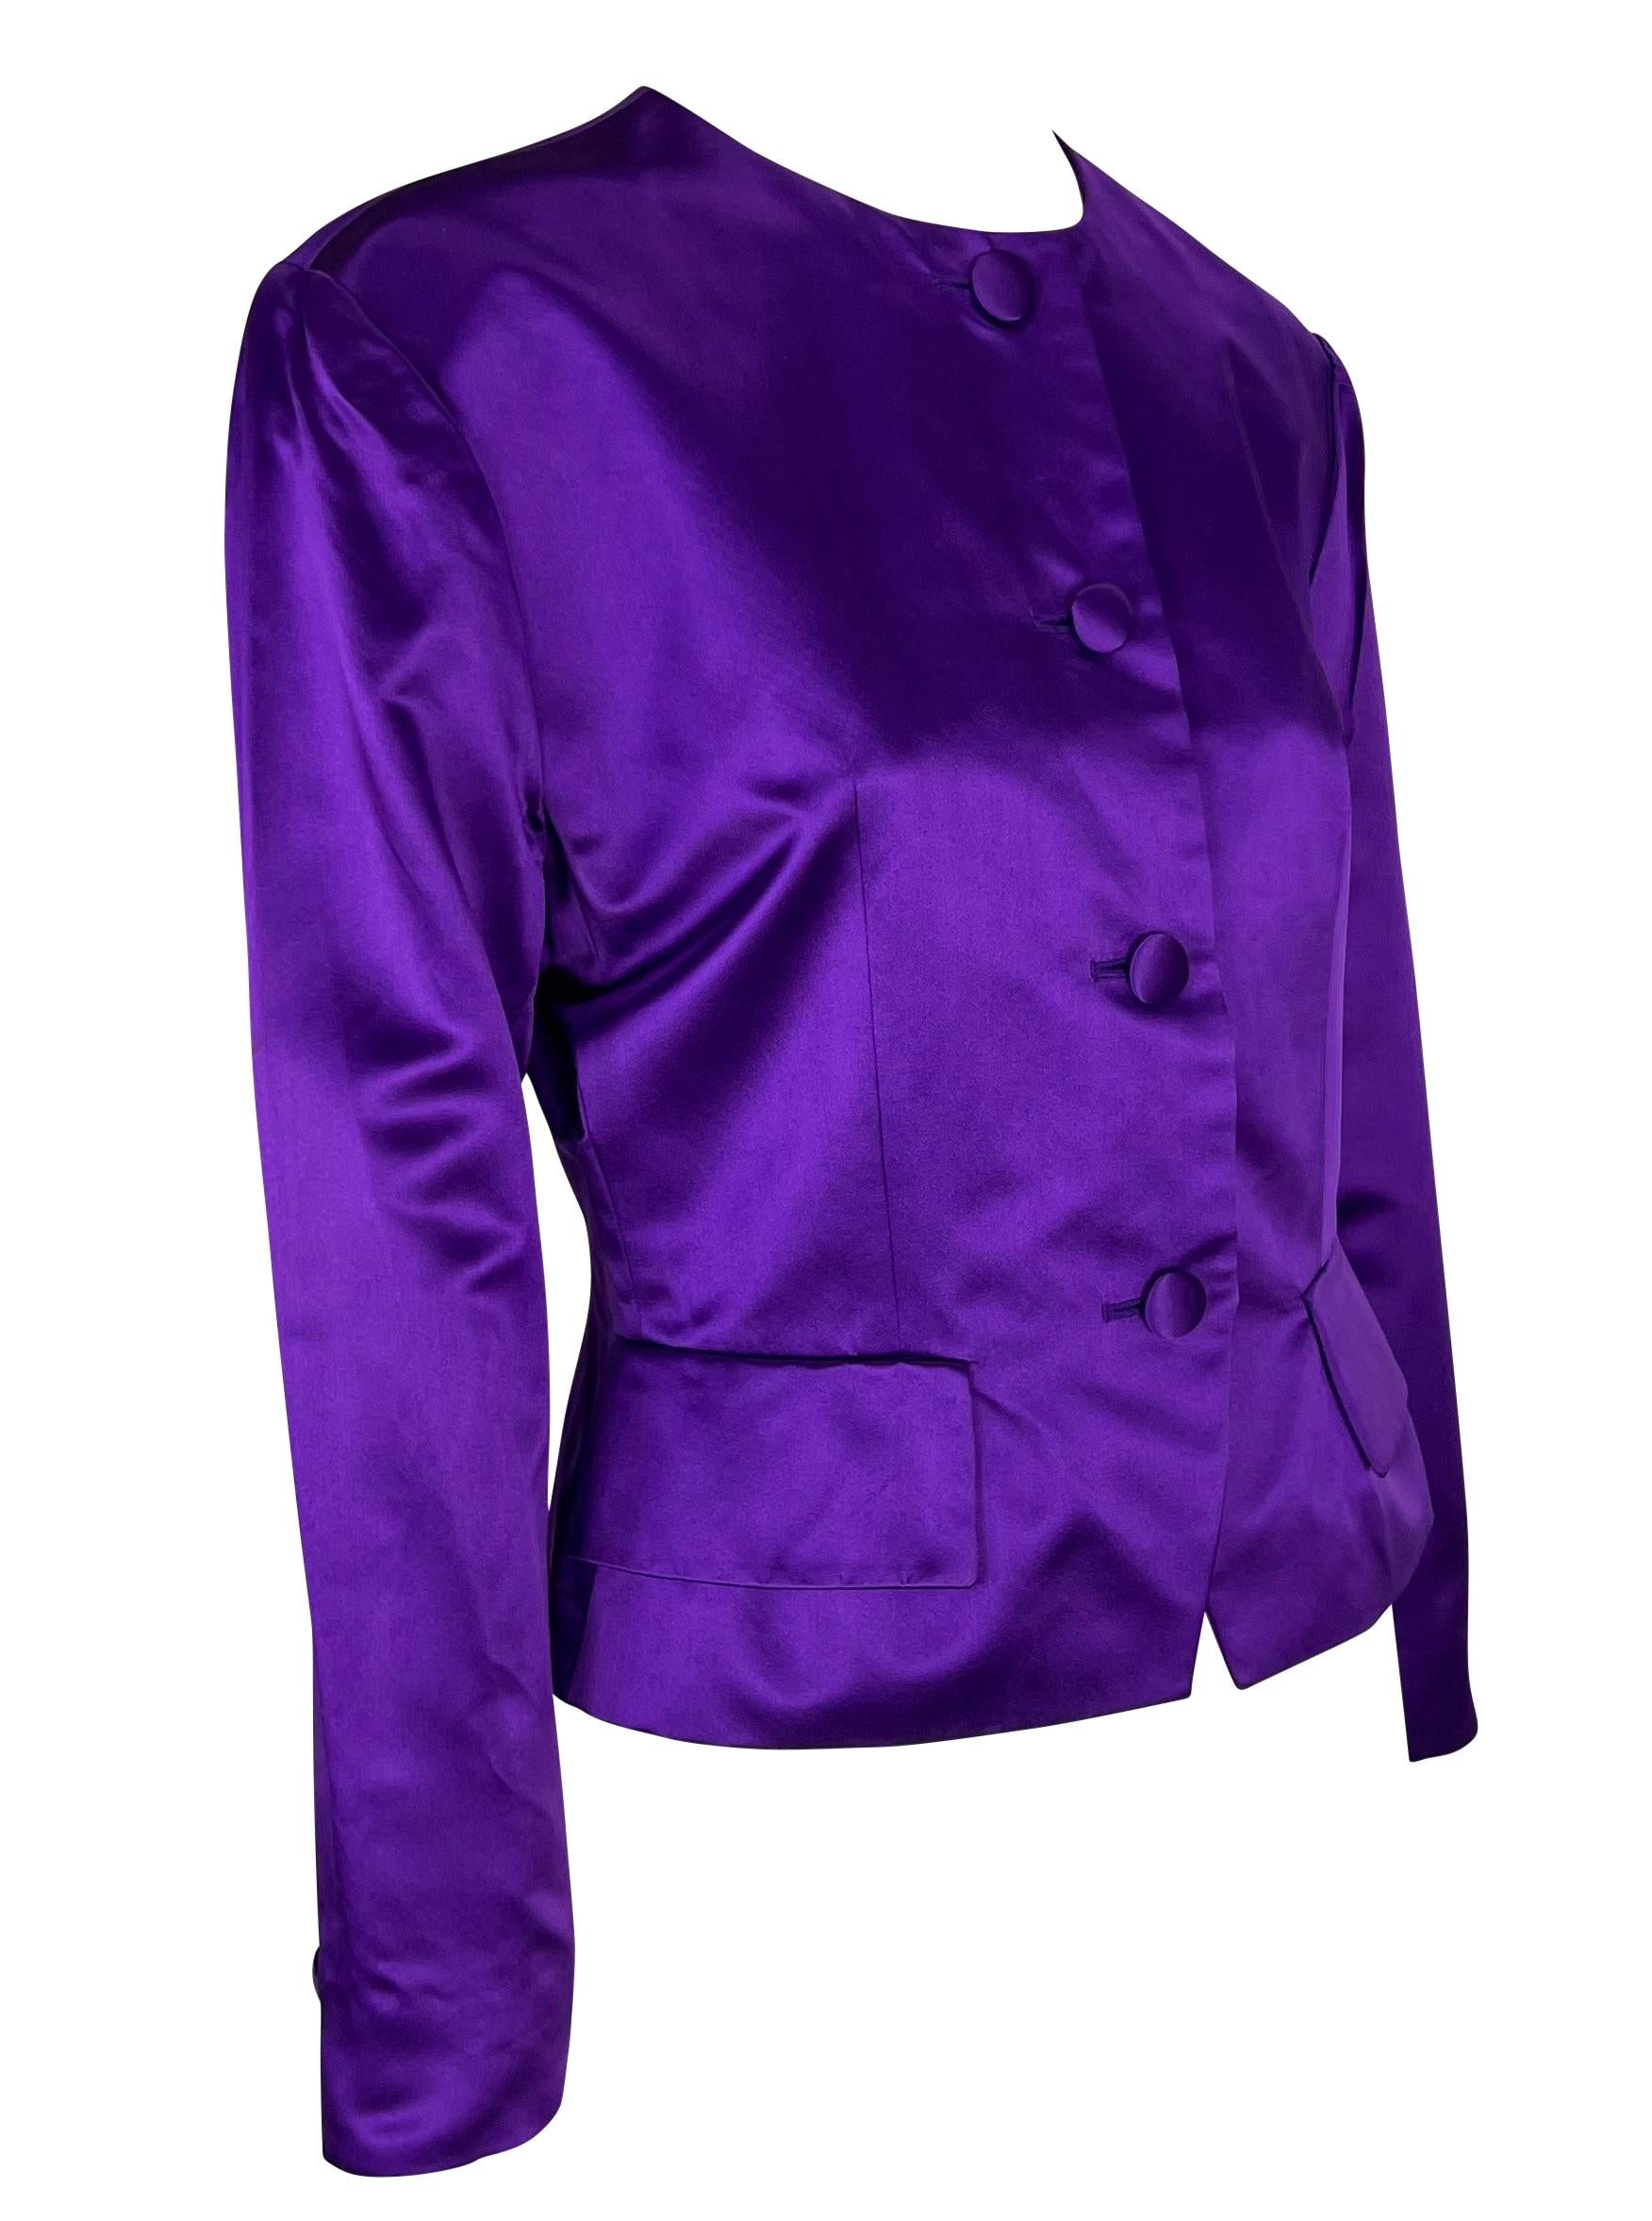 Early 1990s Christian Dior by Gianfranco Ferré Purple Silk Satin Jacket In Good Condition For Sale In West Hollywood, CA